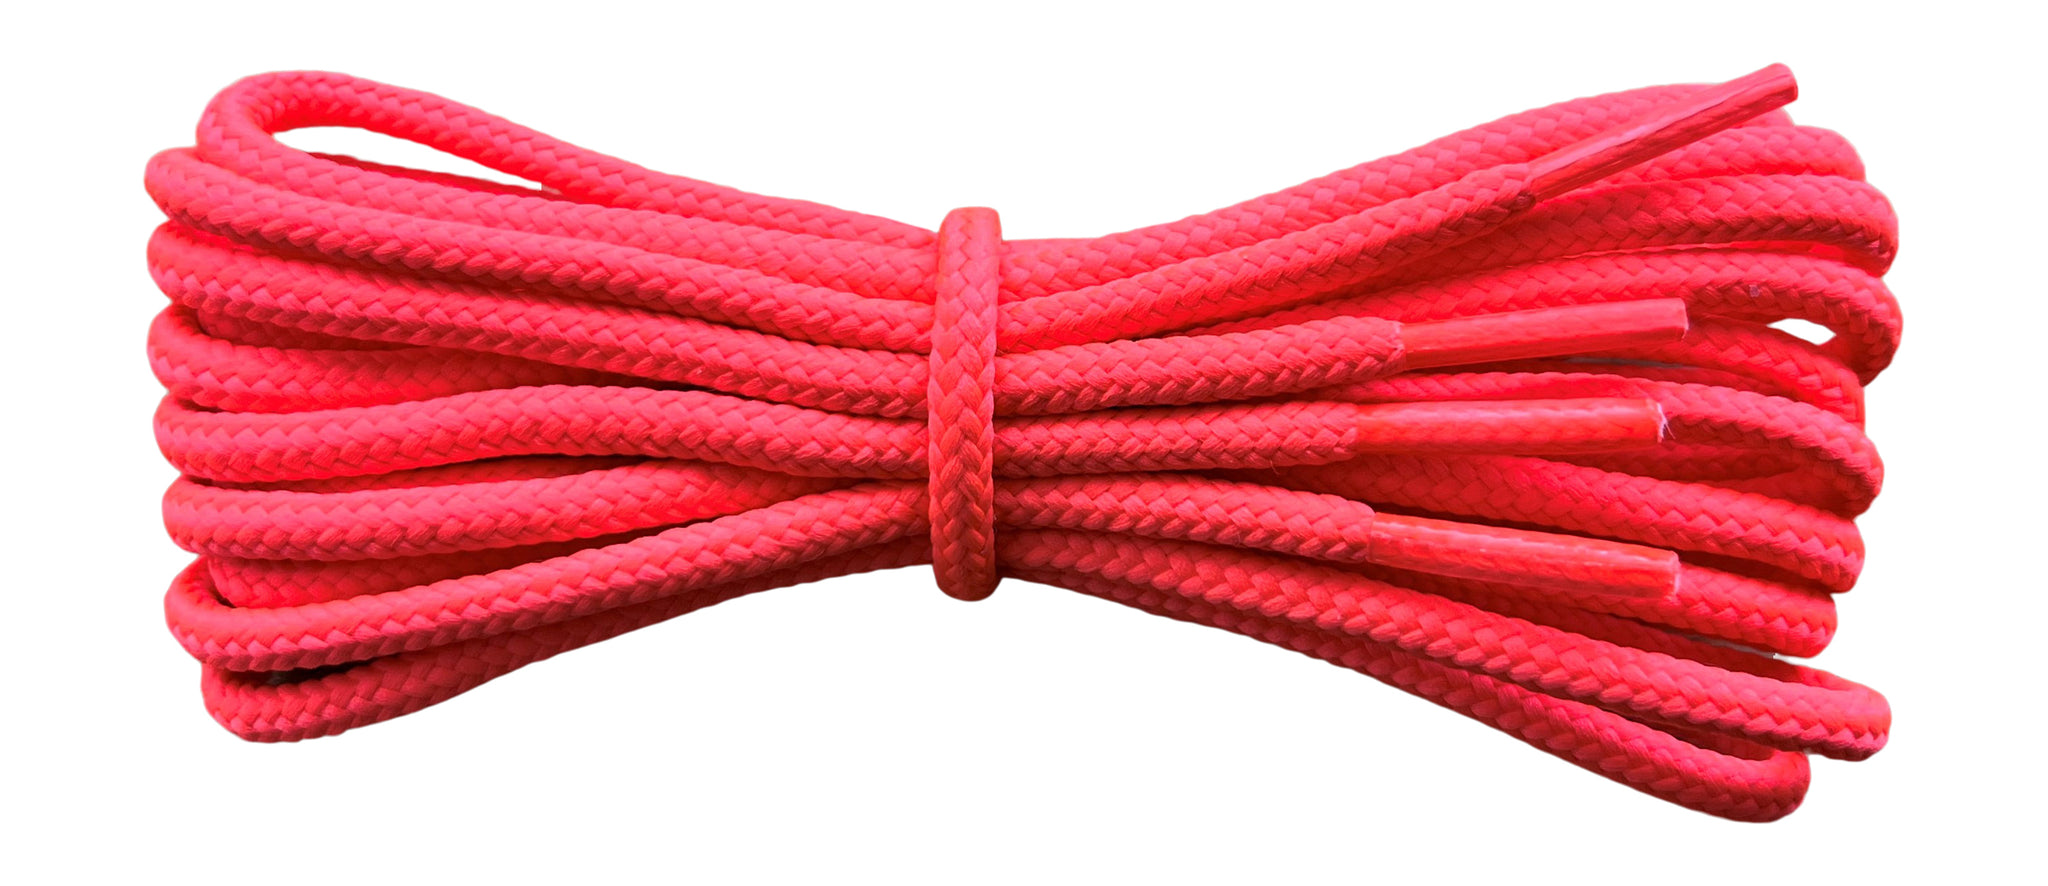 Round 4 mm Fluorescent Pink  boot laces for walking and hiking boots Dr Martens